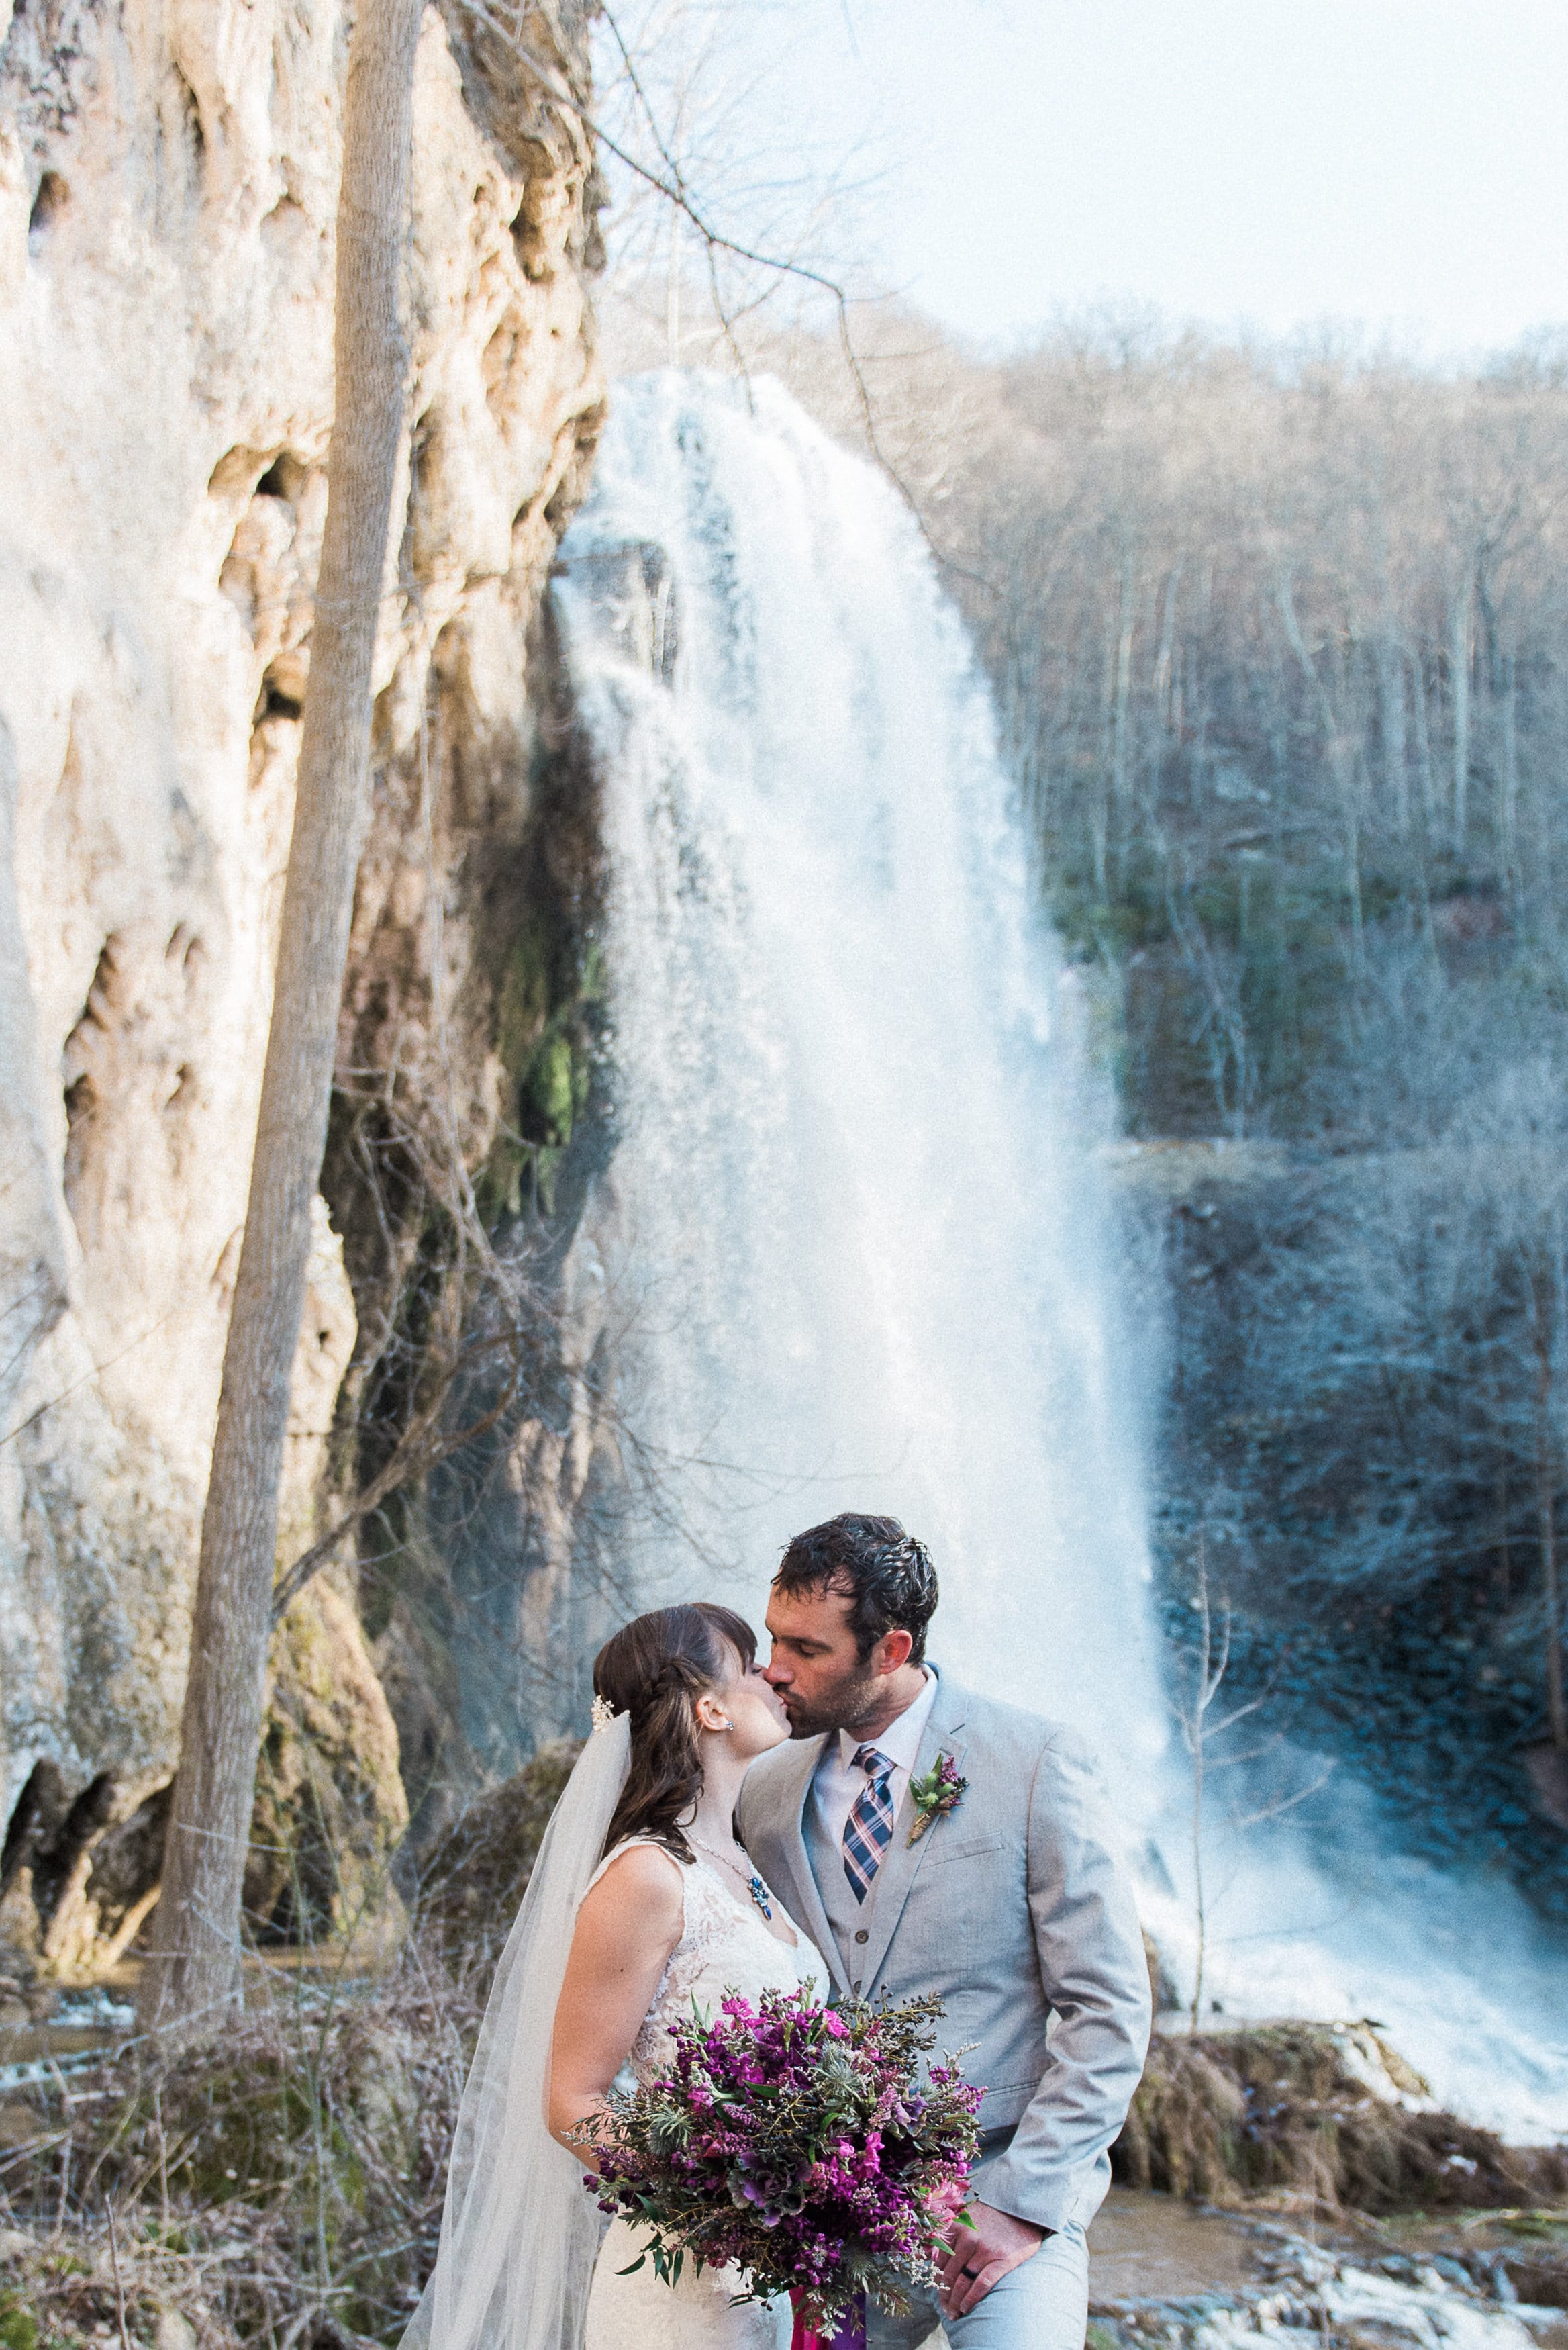 Lace Gown Melanie with Jewel Tones and Waterfall - Maggie Sottero's Melanie gown styled with a jewel-tone wedding palette and a waterfall wedding venue.